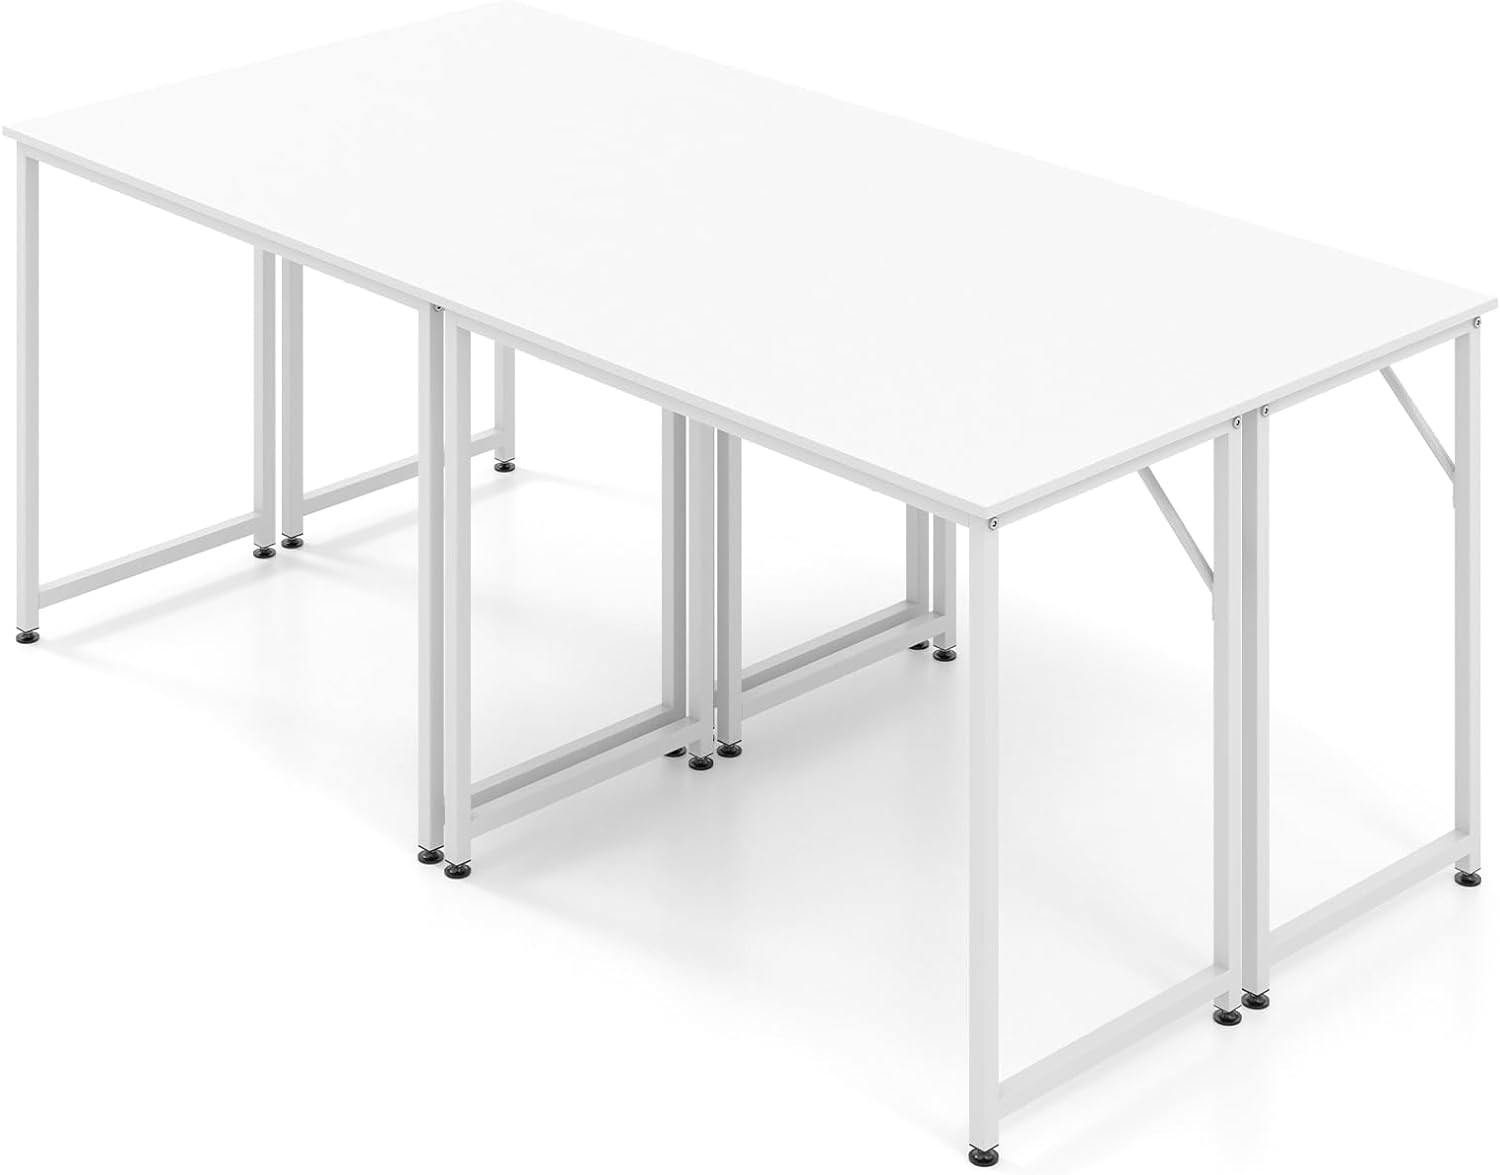 Giantex 6.5 FT Small Conference Table, 2 PCS 40" x 19.5" Rectangular Meeting Table with Heavy-Duty Metal Frame